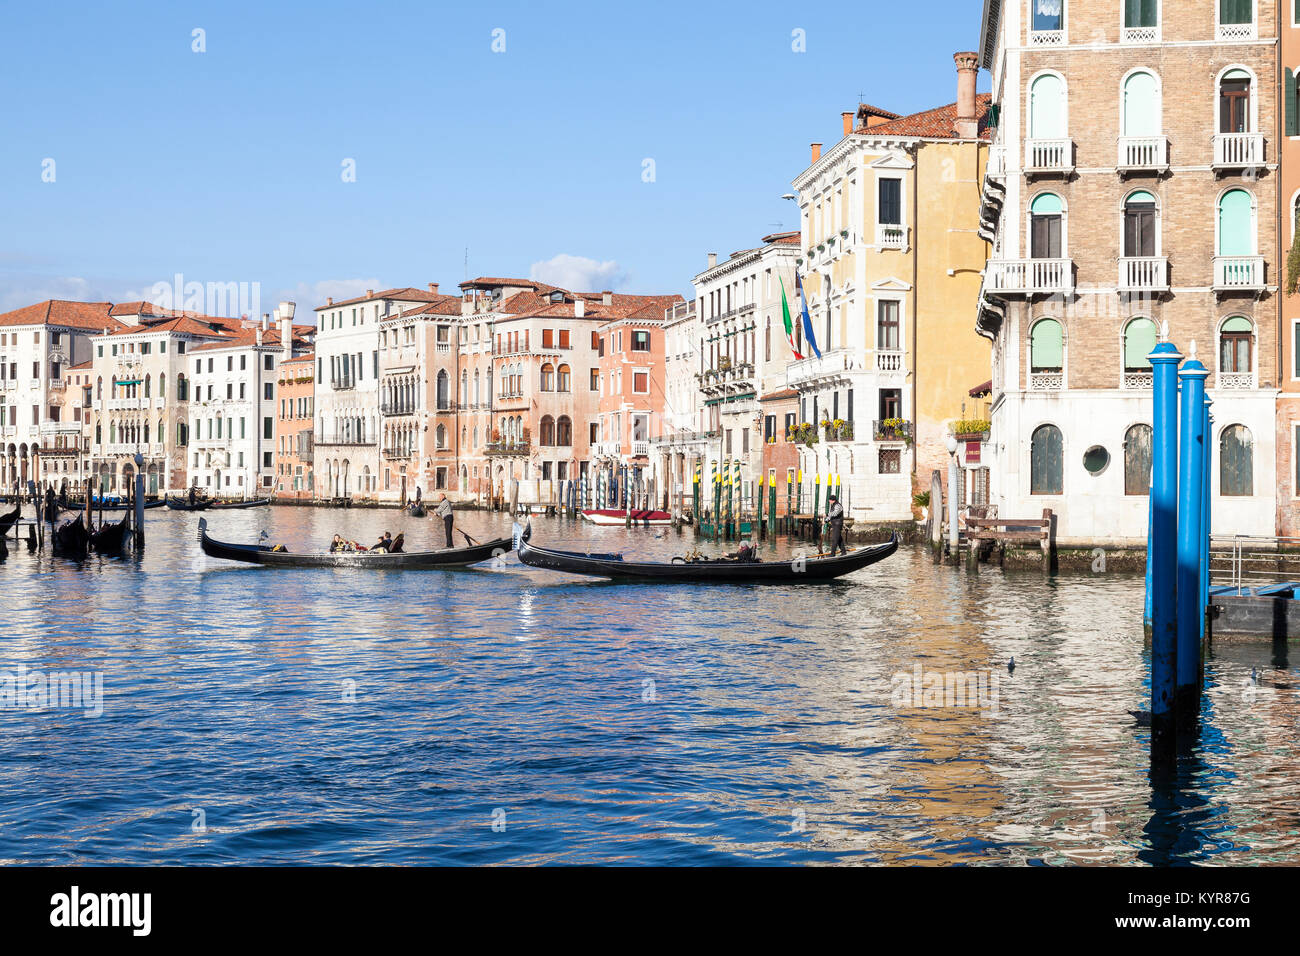 Gondolas with tourists sightseeing on the Grand Canal, Venice,  Veneto, Italy, with reflections from the palazzos on the water in winter sunshine Stock Photo